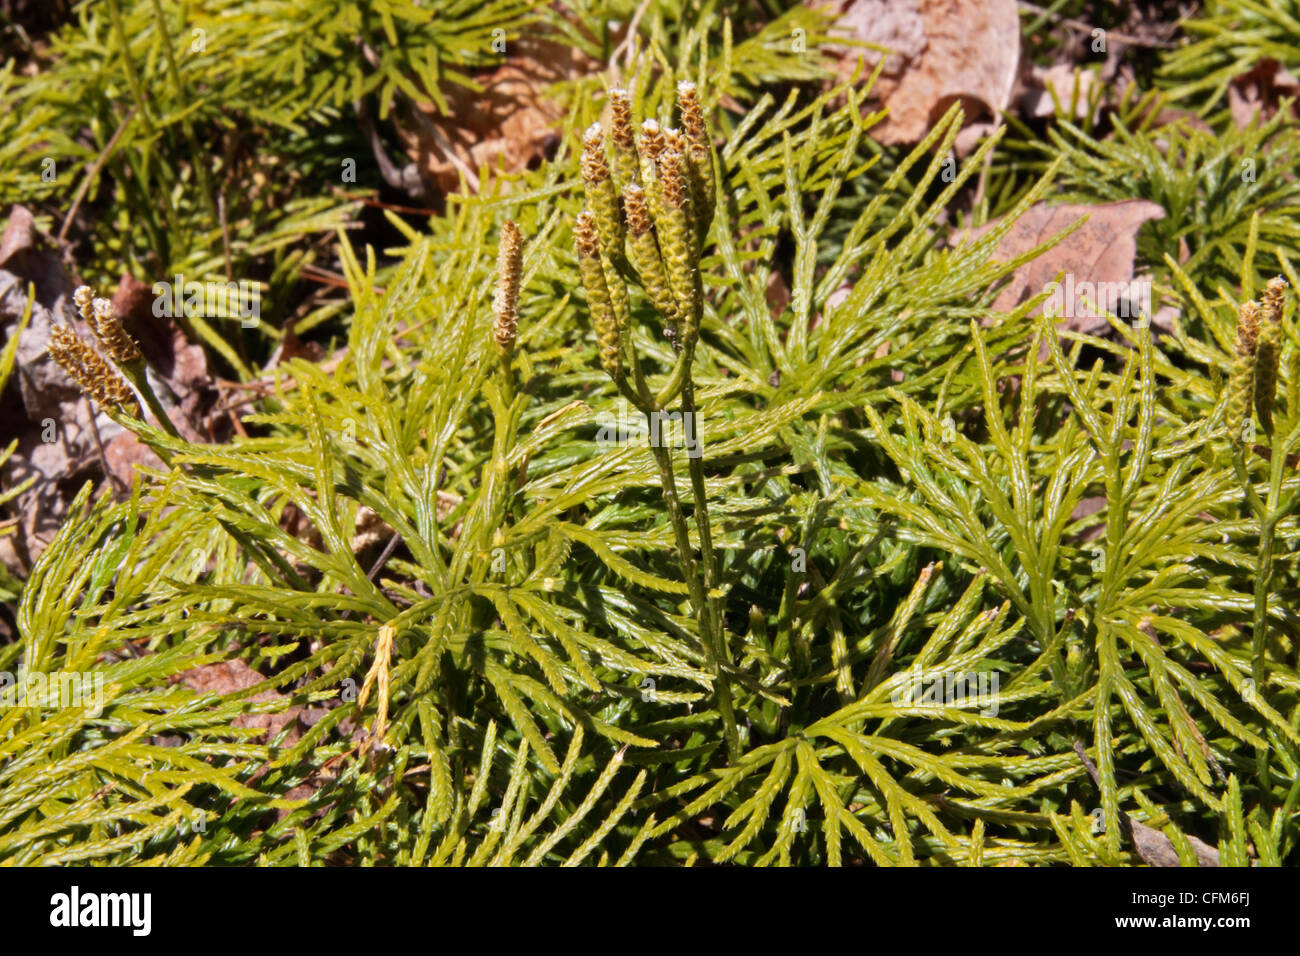 Ground cedar fertile plant growing on bankside in forest in Tennessee Stock Photo